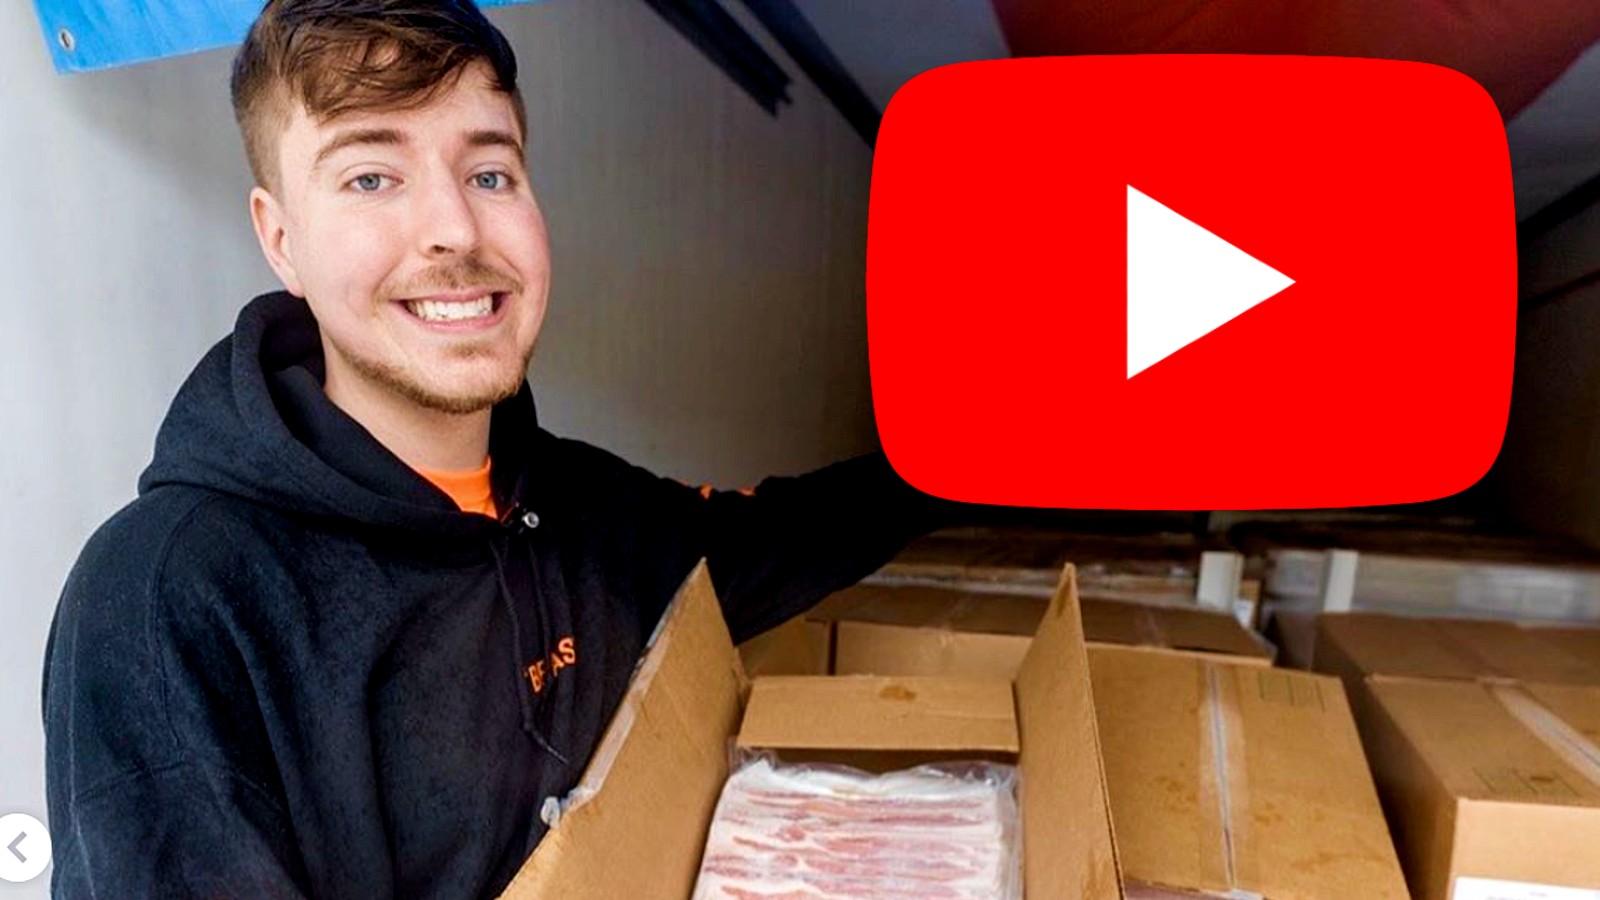 Mr Beast stands next to the YouTube logo